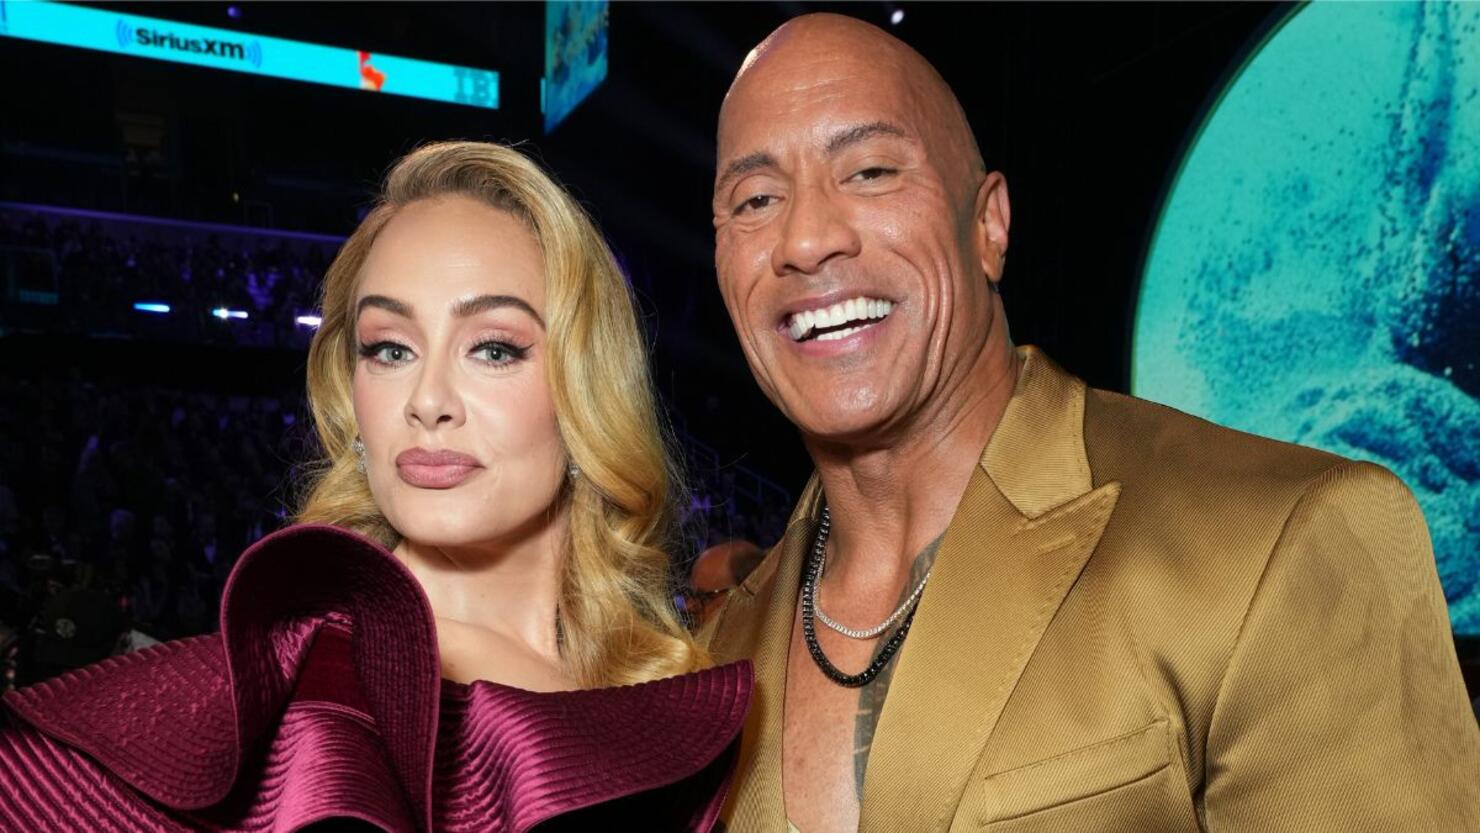 The Rock Loved Surprising Adele at the Grammys